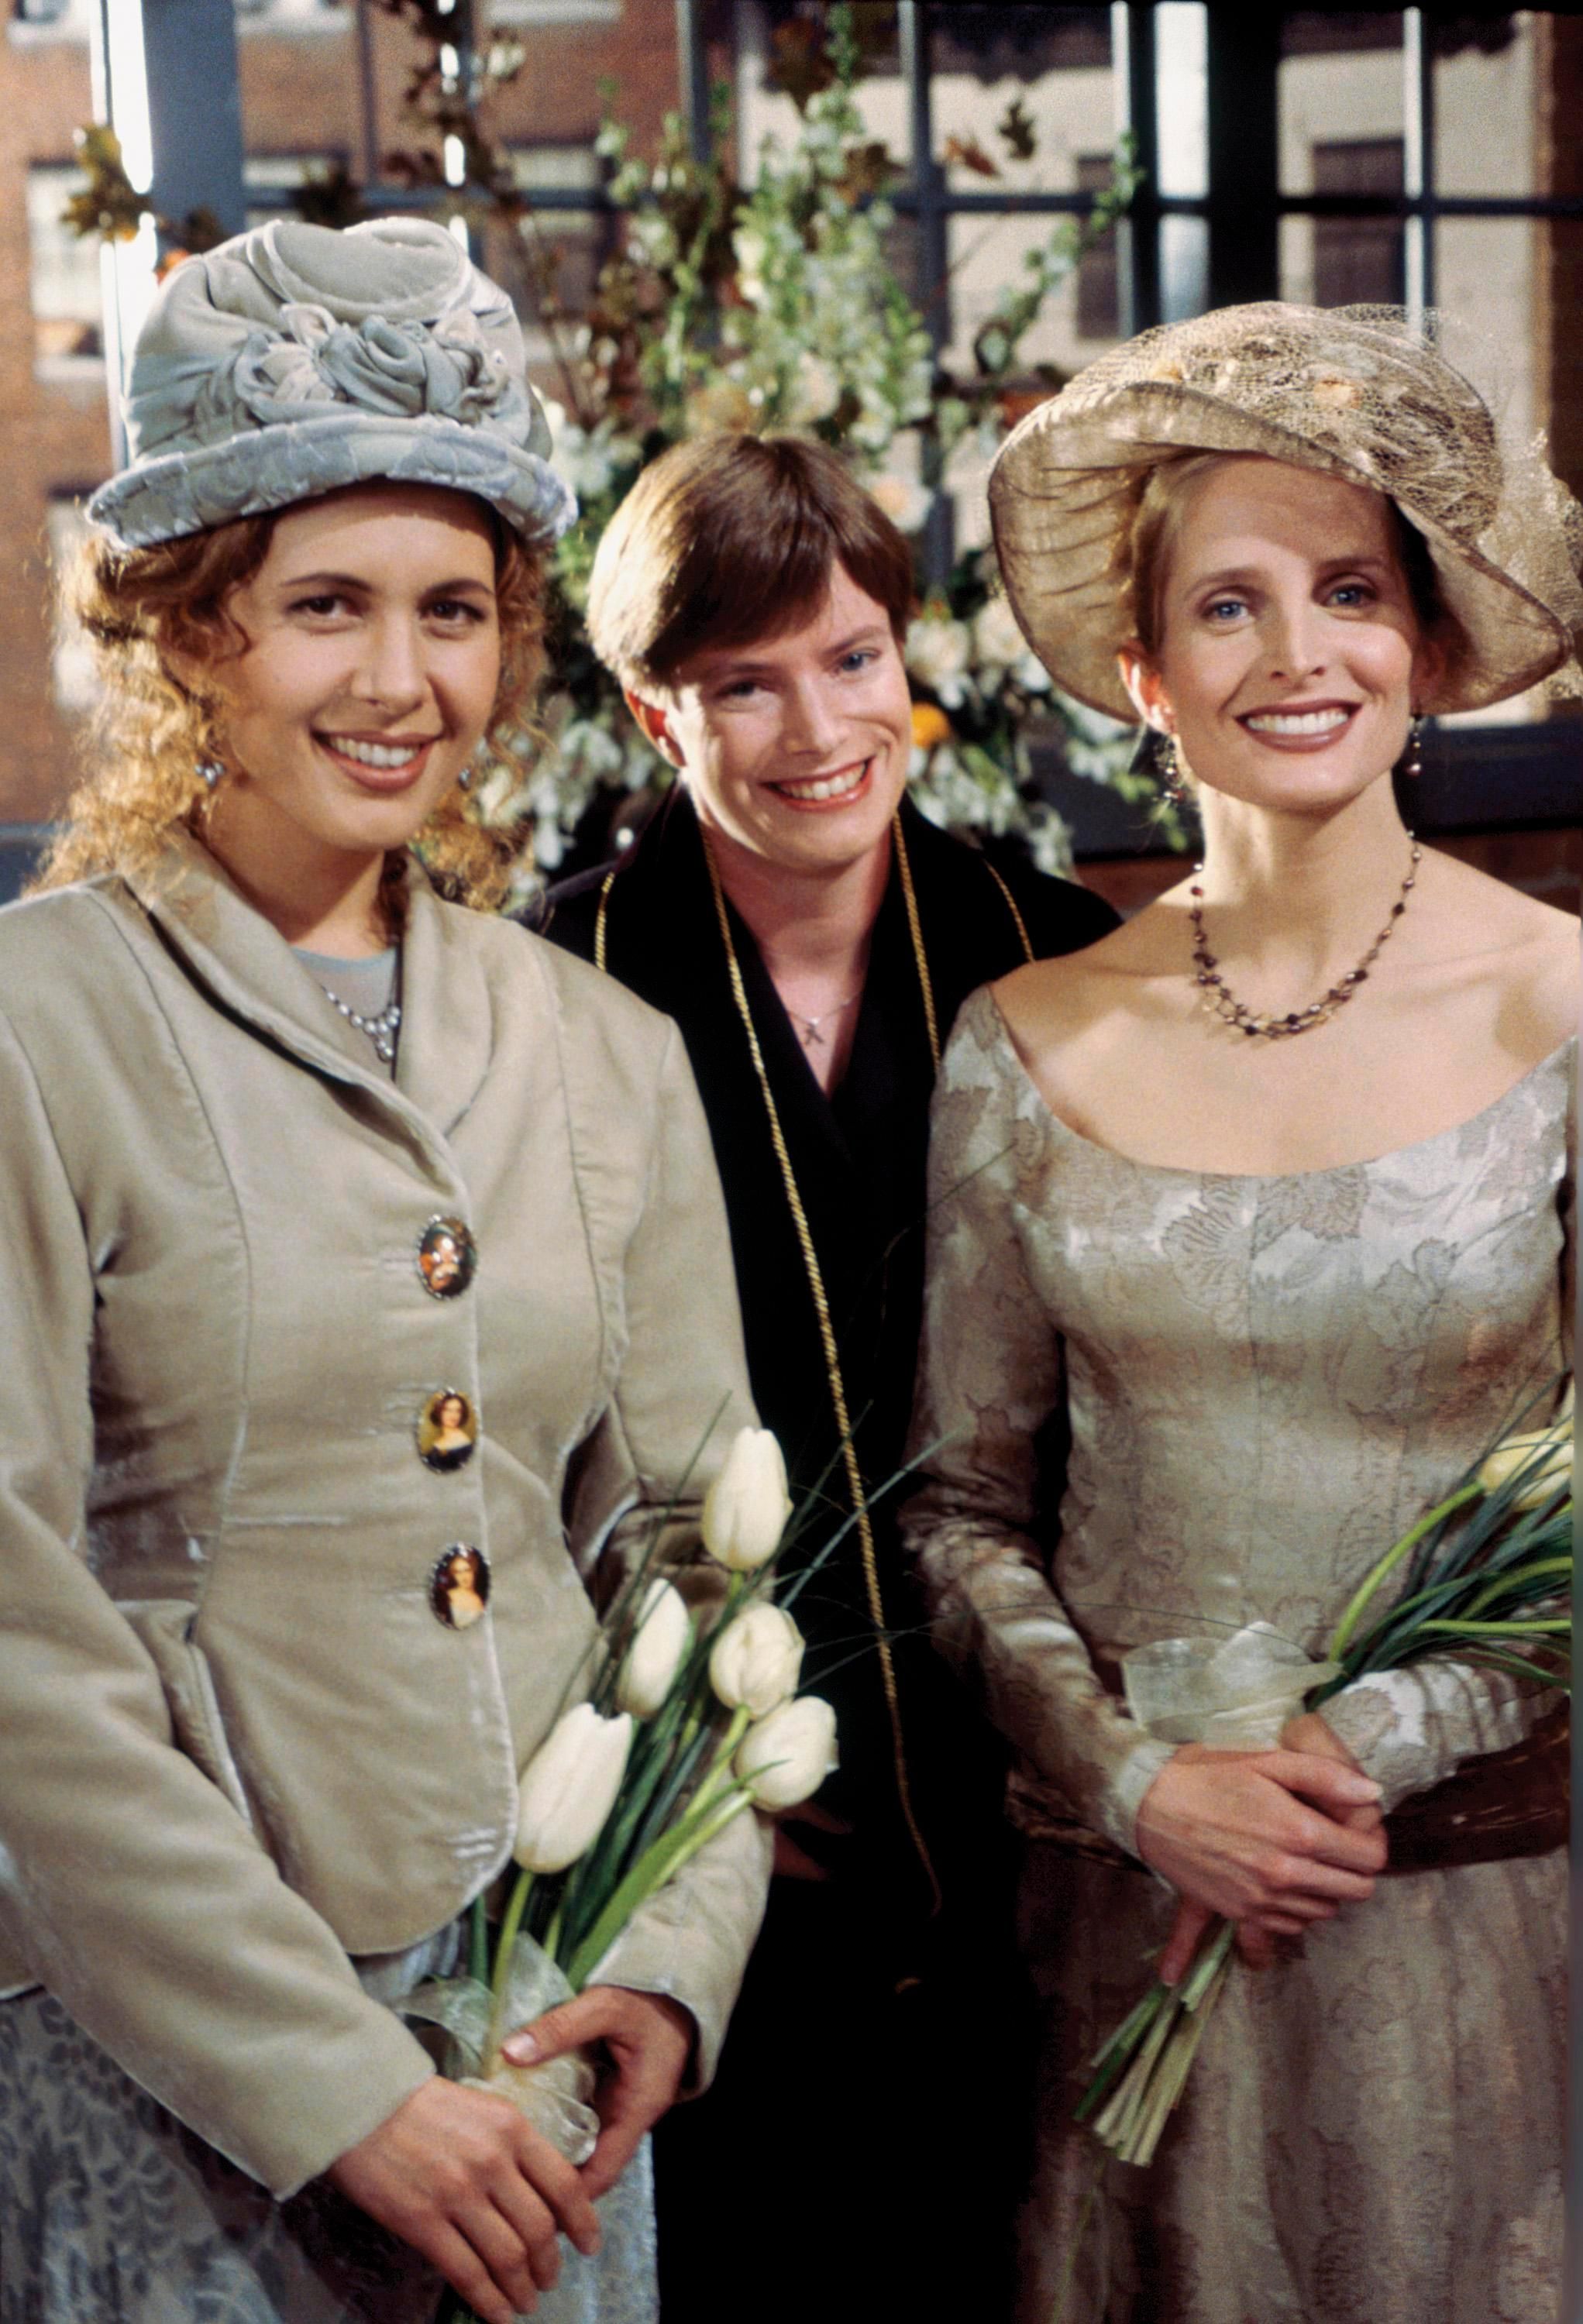 Carol And Susan's Wedding In Friends